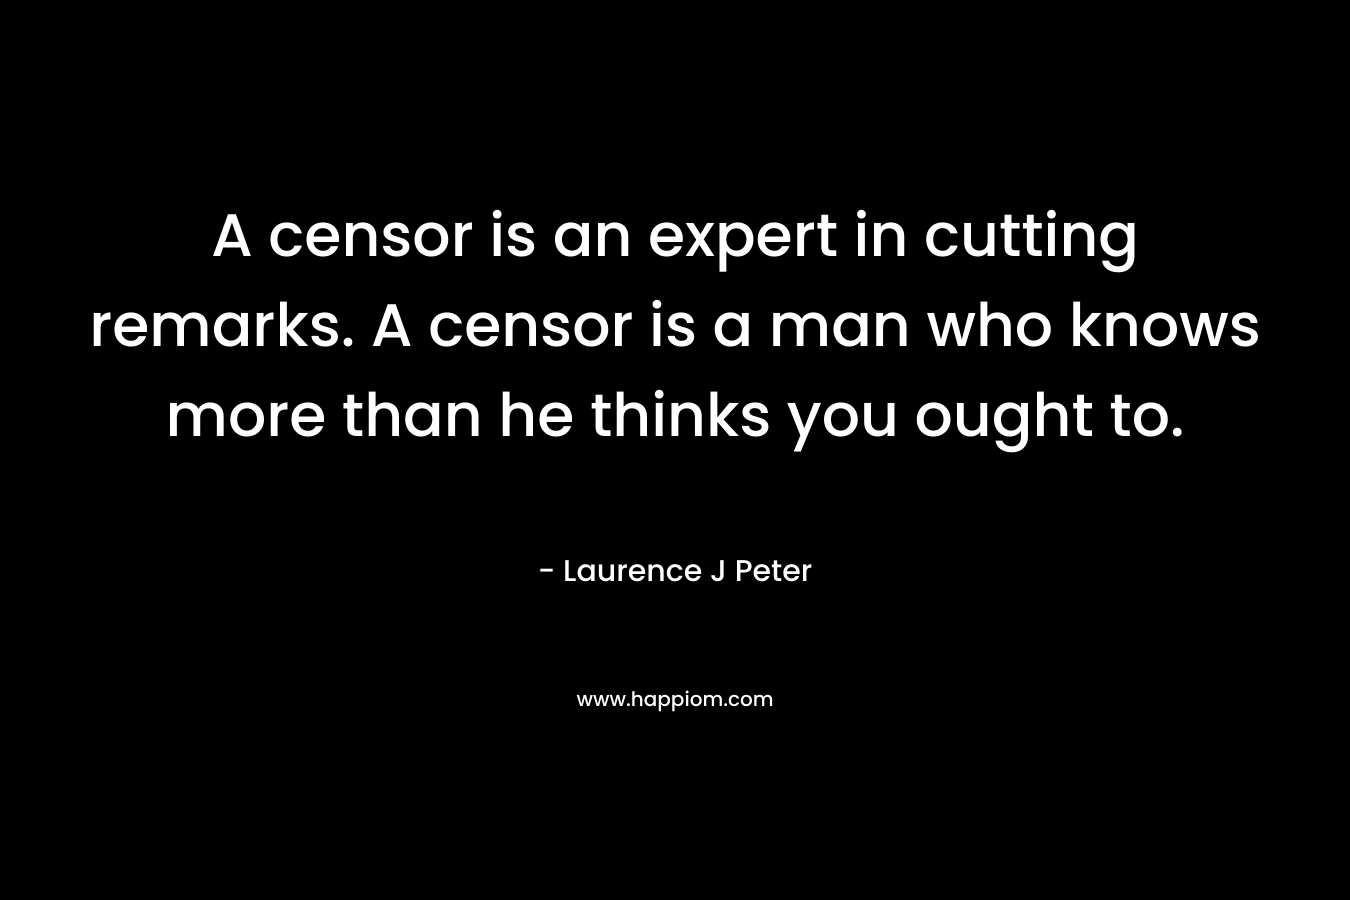 A censor is an expert in cutting remarks. A censor is a man who knows more than he thinks you ought to. – Laurence J Peter